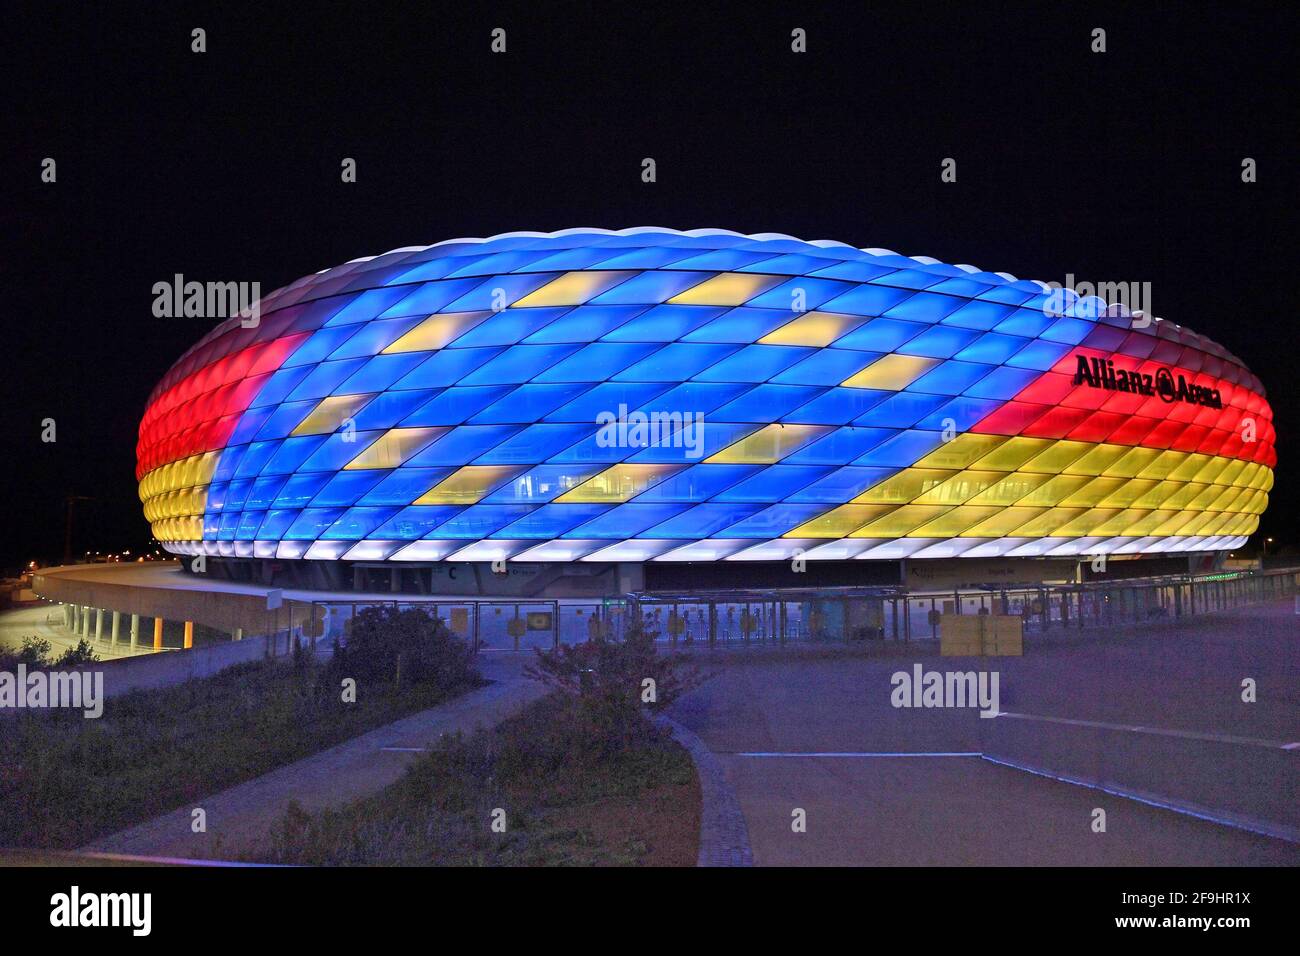 European Championship hosts Munich - UEFA demands audience guarantee! The European Football Union has increased the pressure on the German EM location Munich and set a deadline for a spectator guarantee. "Additional information" on the plans should be submitted by the executive meeting on April 19th. Archive photo: Special lighting in the ALLIANZ ARENA. FC Bayern Munich and the Bundesliga support the application to host UEFA EURO 2024. Soccer arena, soccer stadium, stadium, FC Bayern Munich, aftertake, evening sky, afterthimmel, illuminated, light, mood, evening mood, overview, long shot, arch Stock Photo